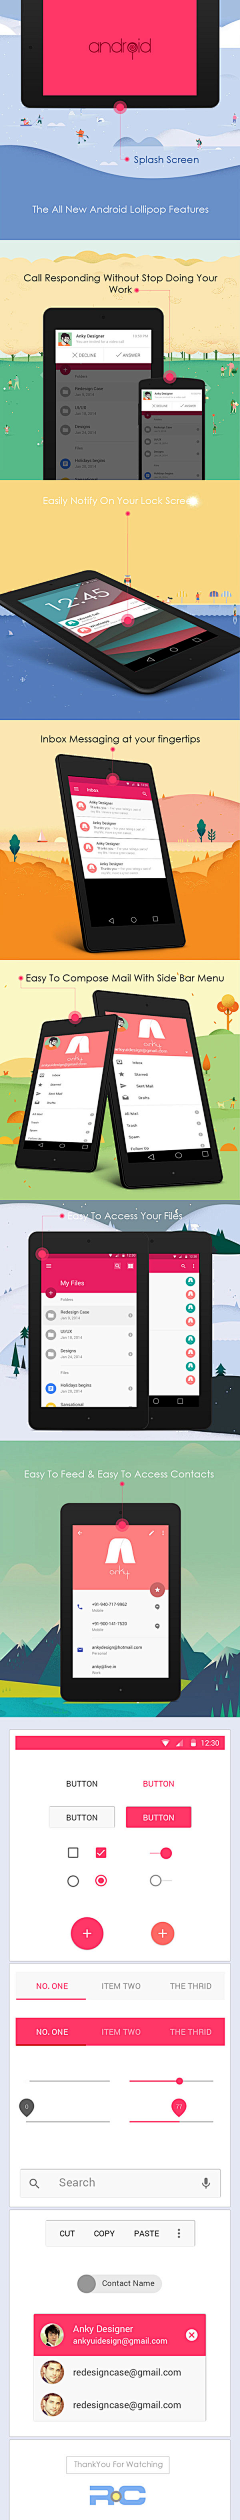 WangYuanXin采集到Android Lollipop